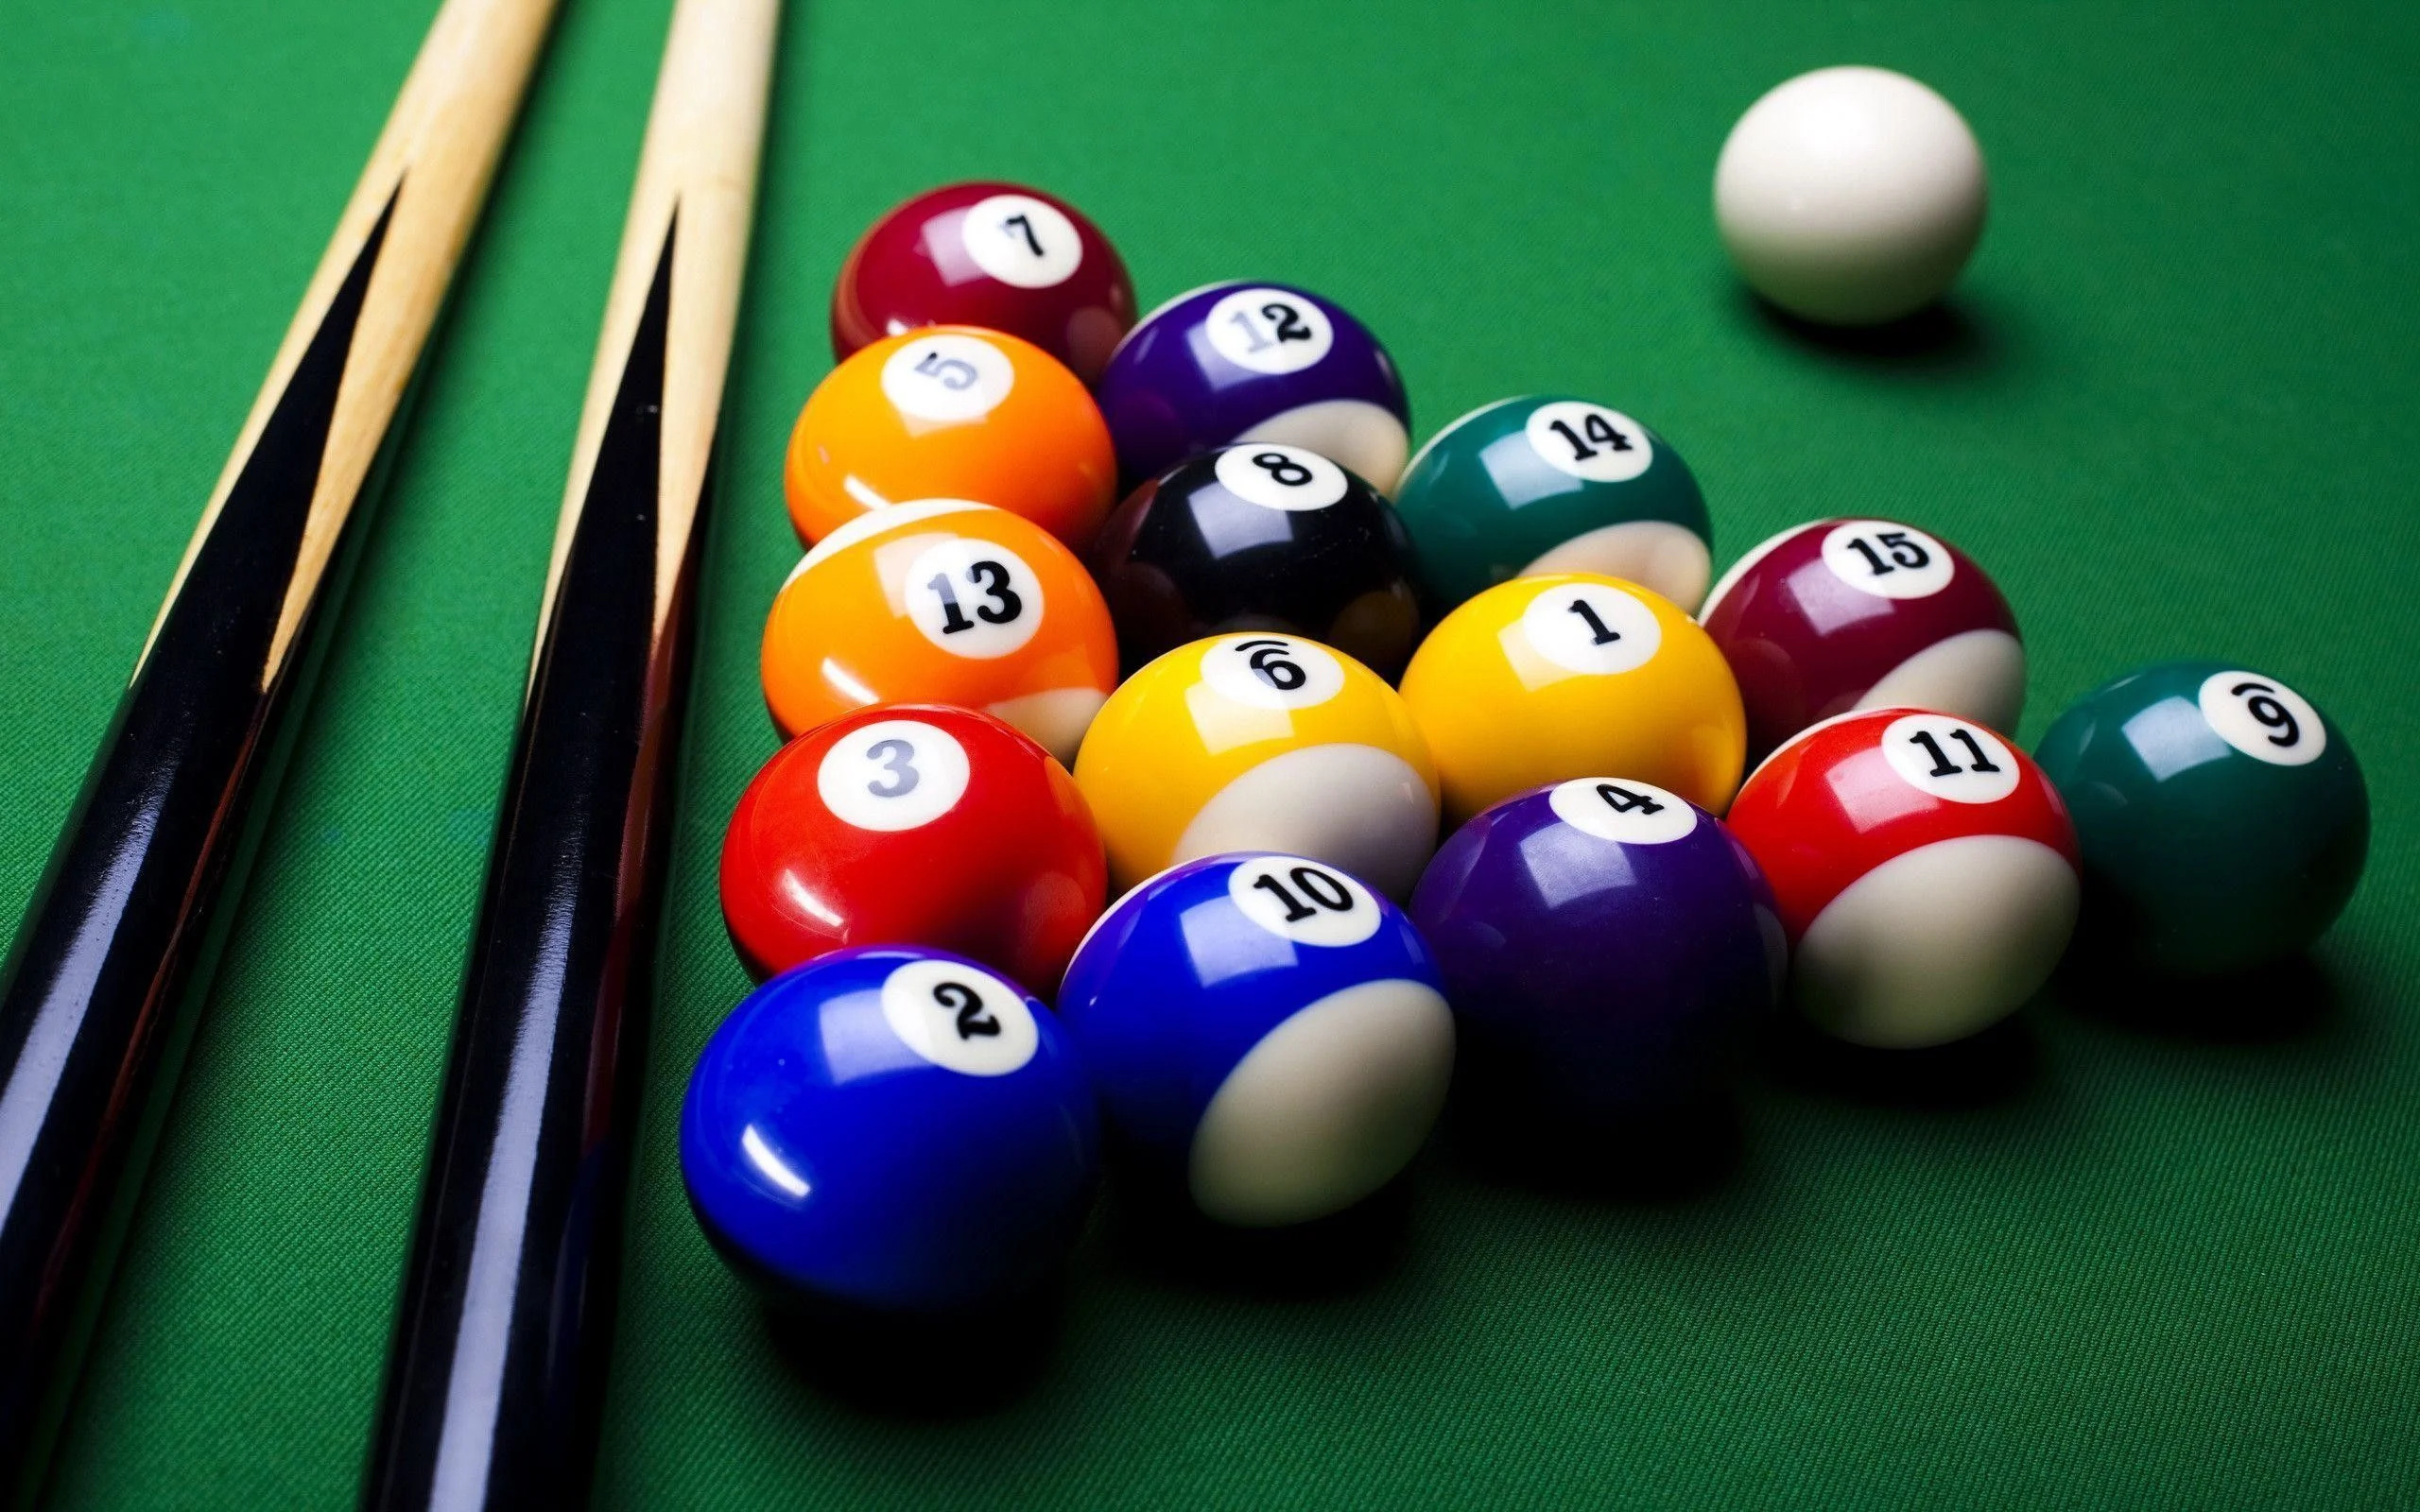 Cue Sports: Classic eight-ball, Seven solid-colored balls, seven striped balls, and the black 8 ball. 2560x1600 HD Background.